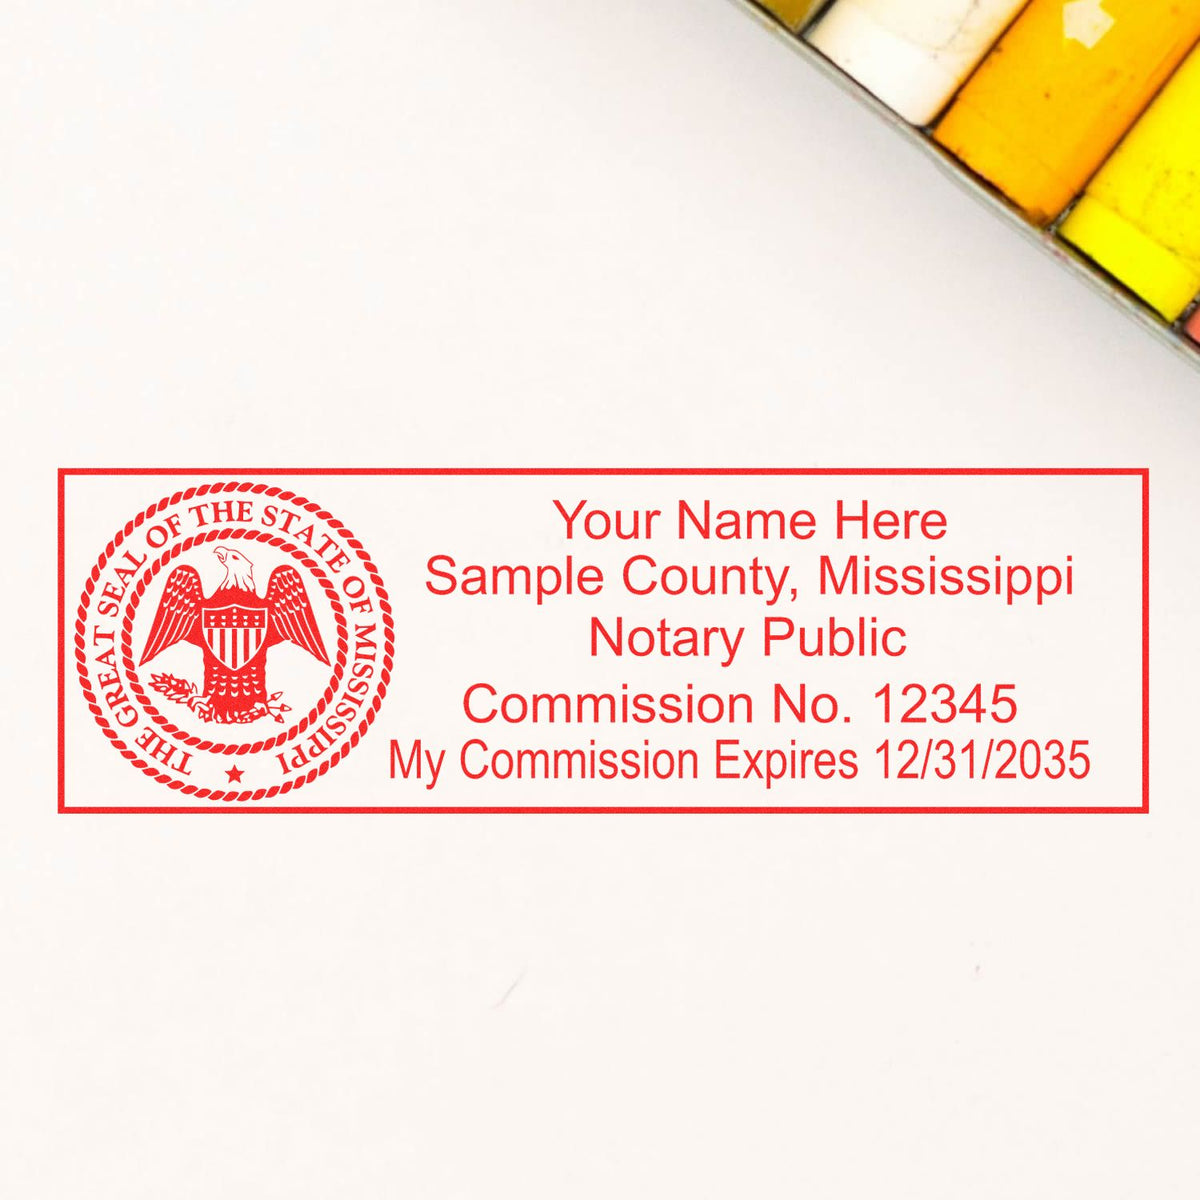 An alternative view of the MaxLight Premium Pre-Inked Mississippi State Seal Notarial Stamp stamped on a sheet of paper showing the image in use